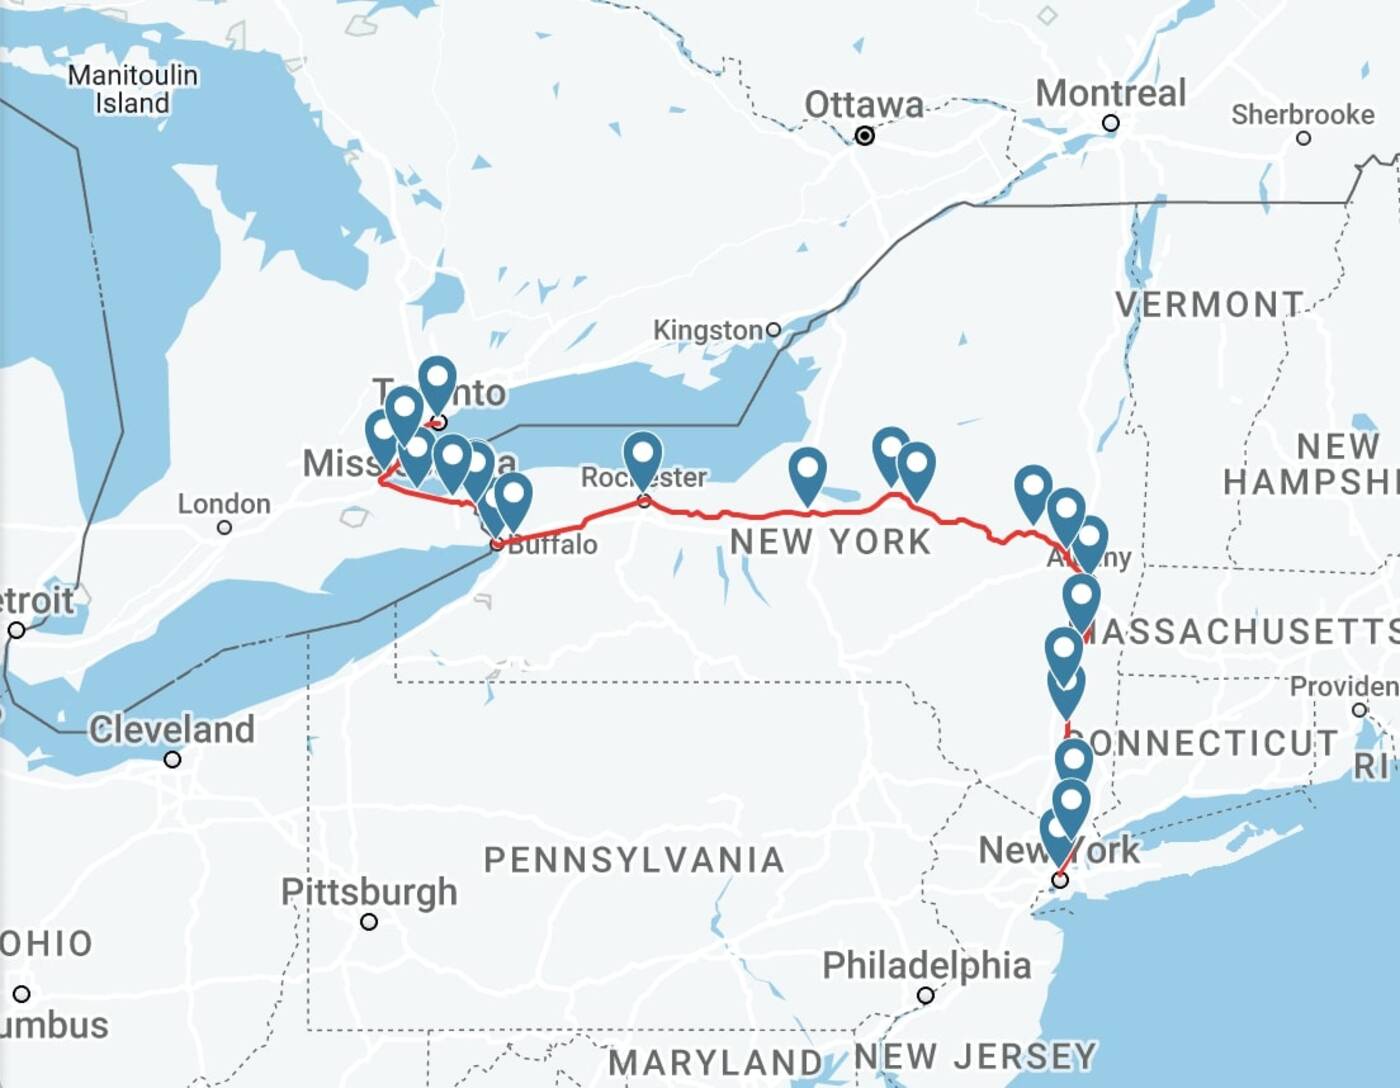 Amtrak train route from Toronto to New York City